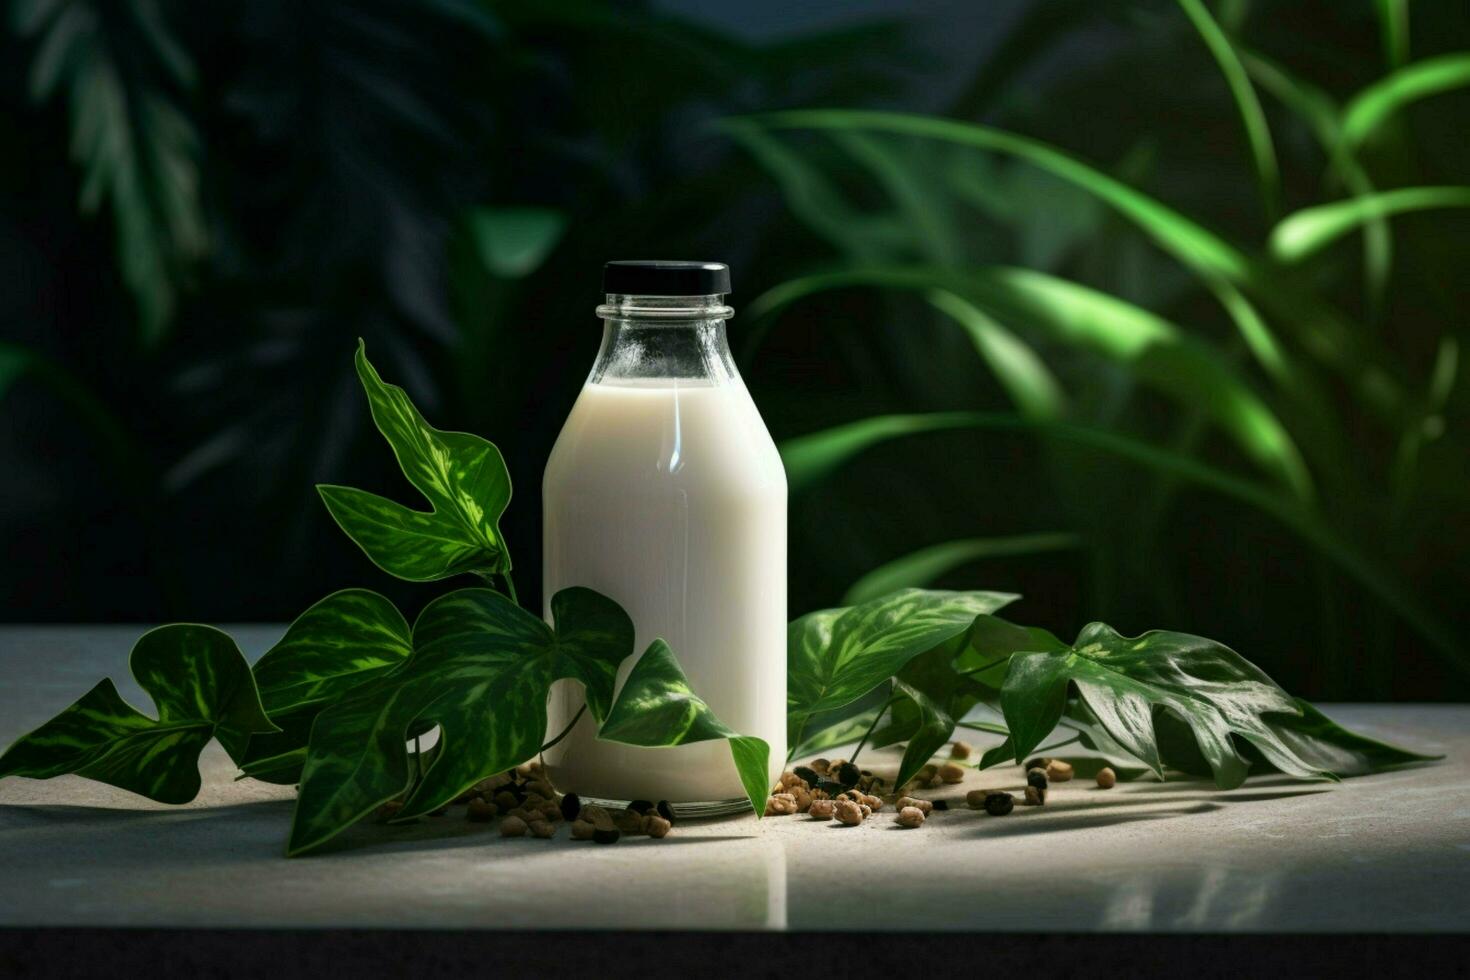 a bottle of milk with a black cap sits on a table photo